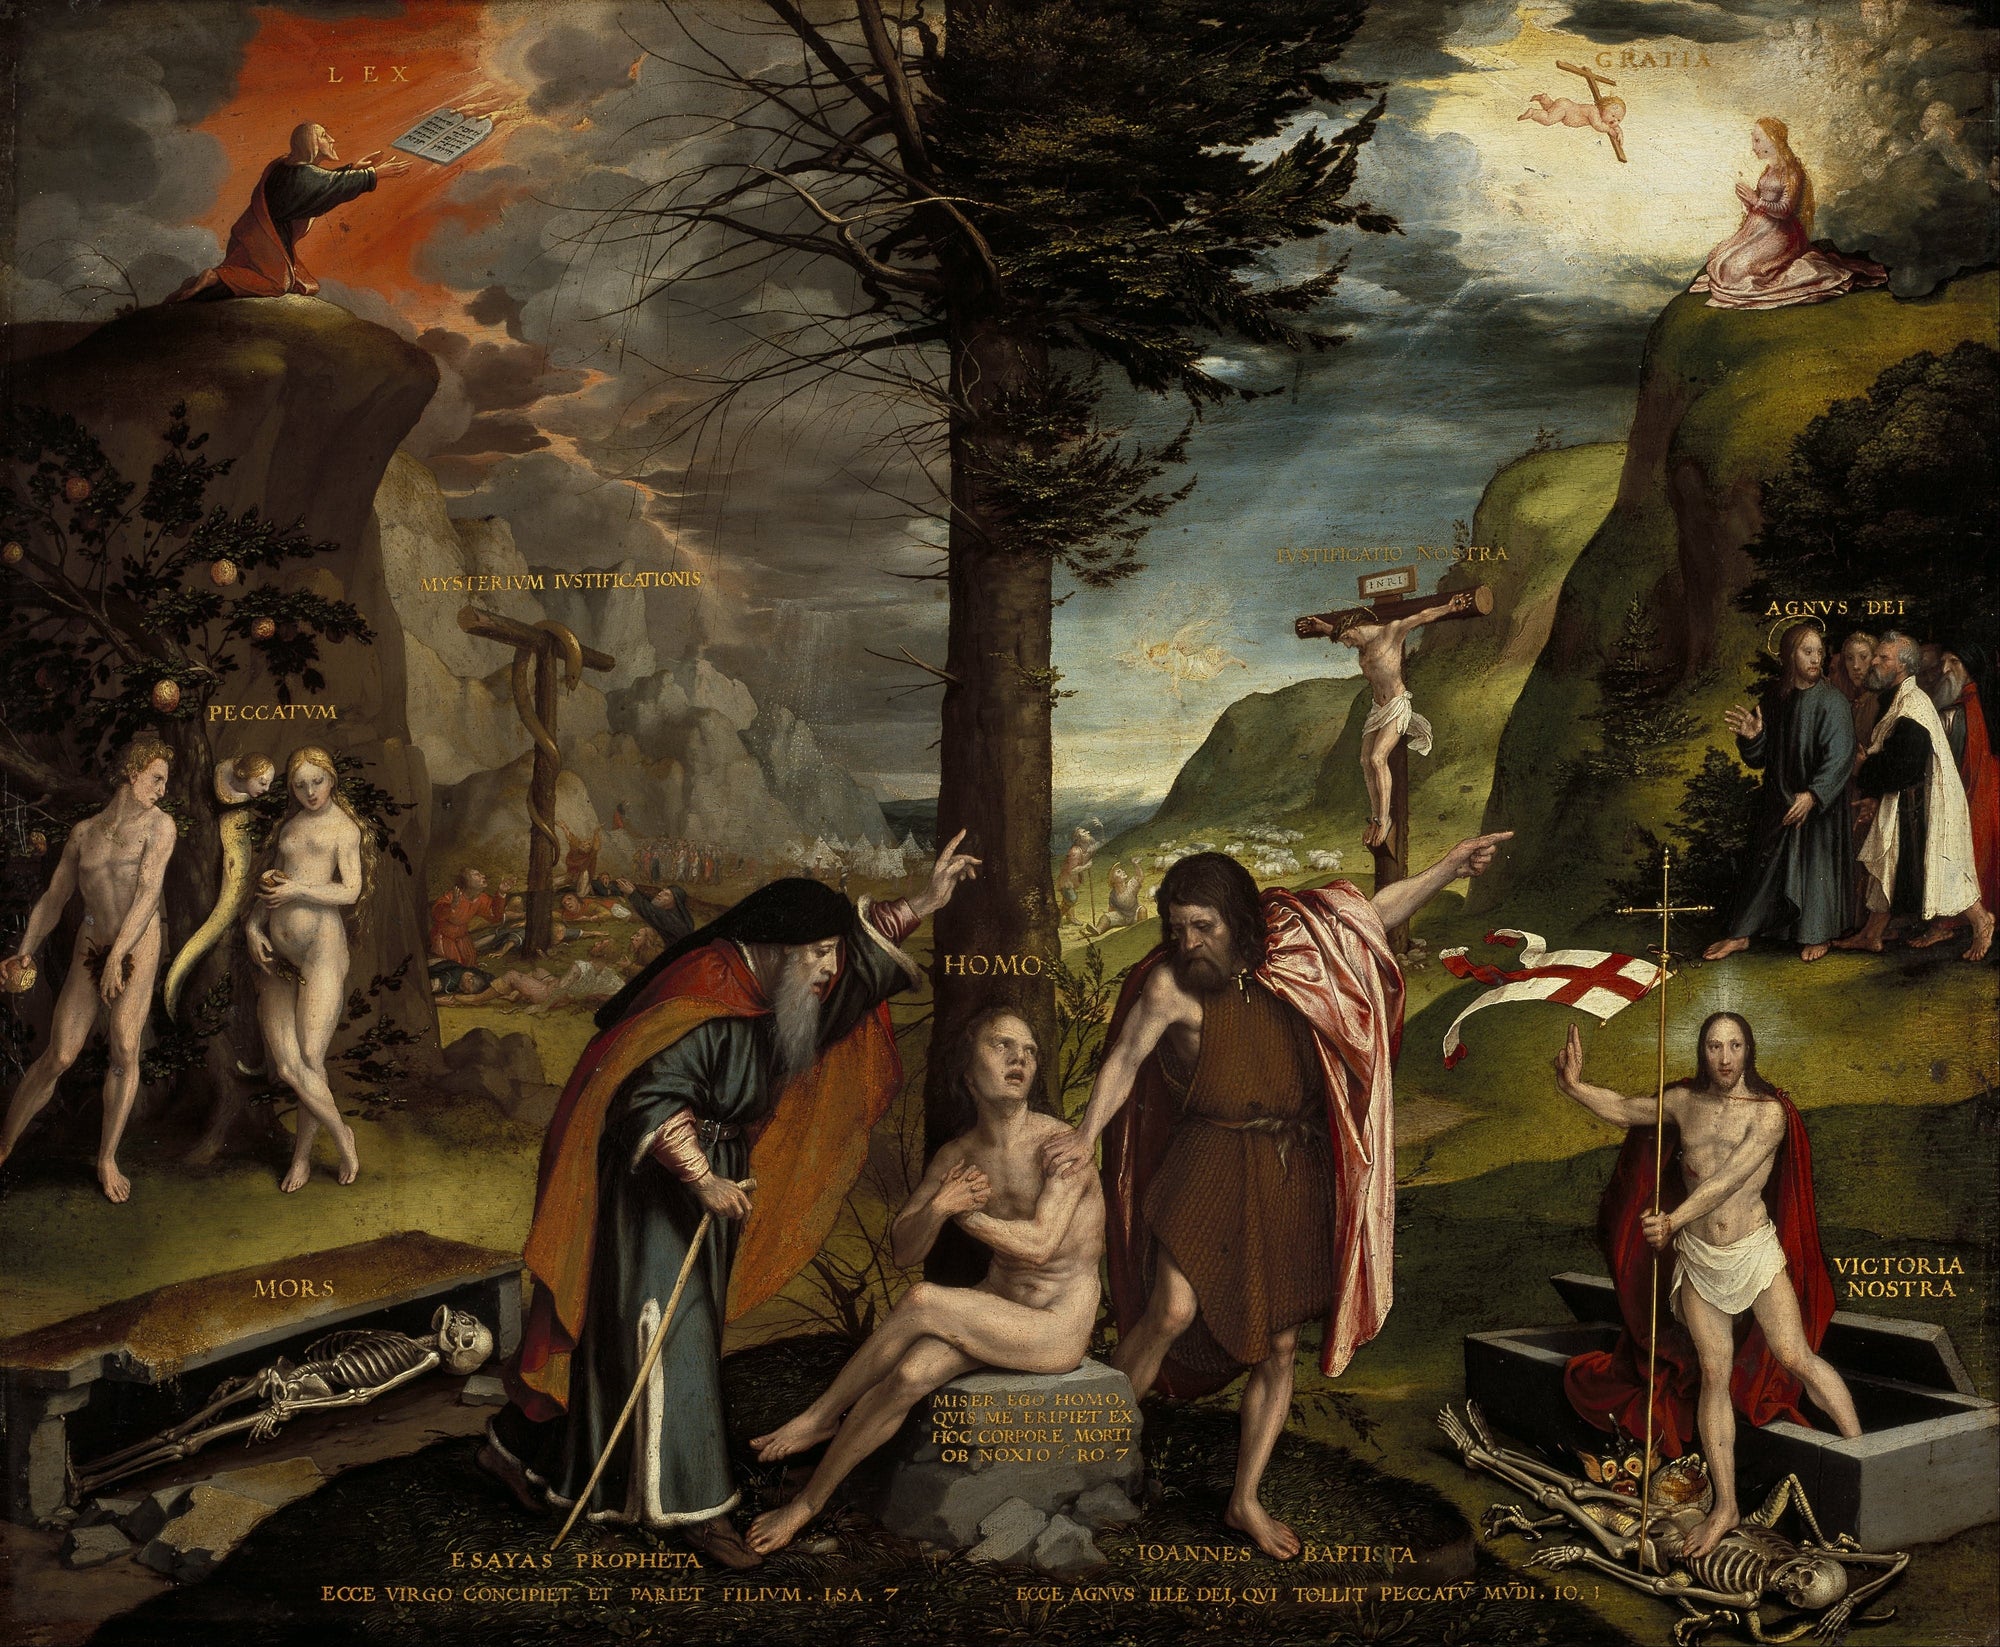 "An Allegory of the Old and New Testaments" by Hans Holbein the younger 1535